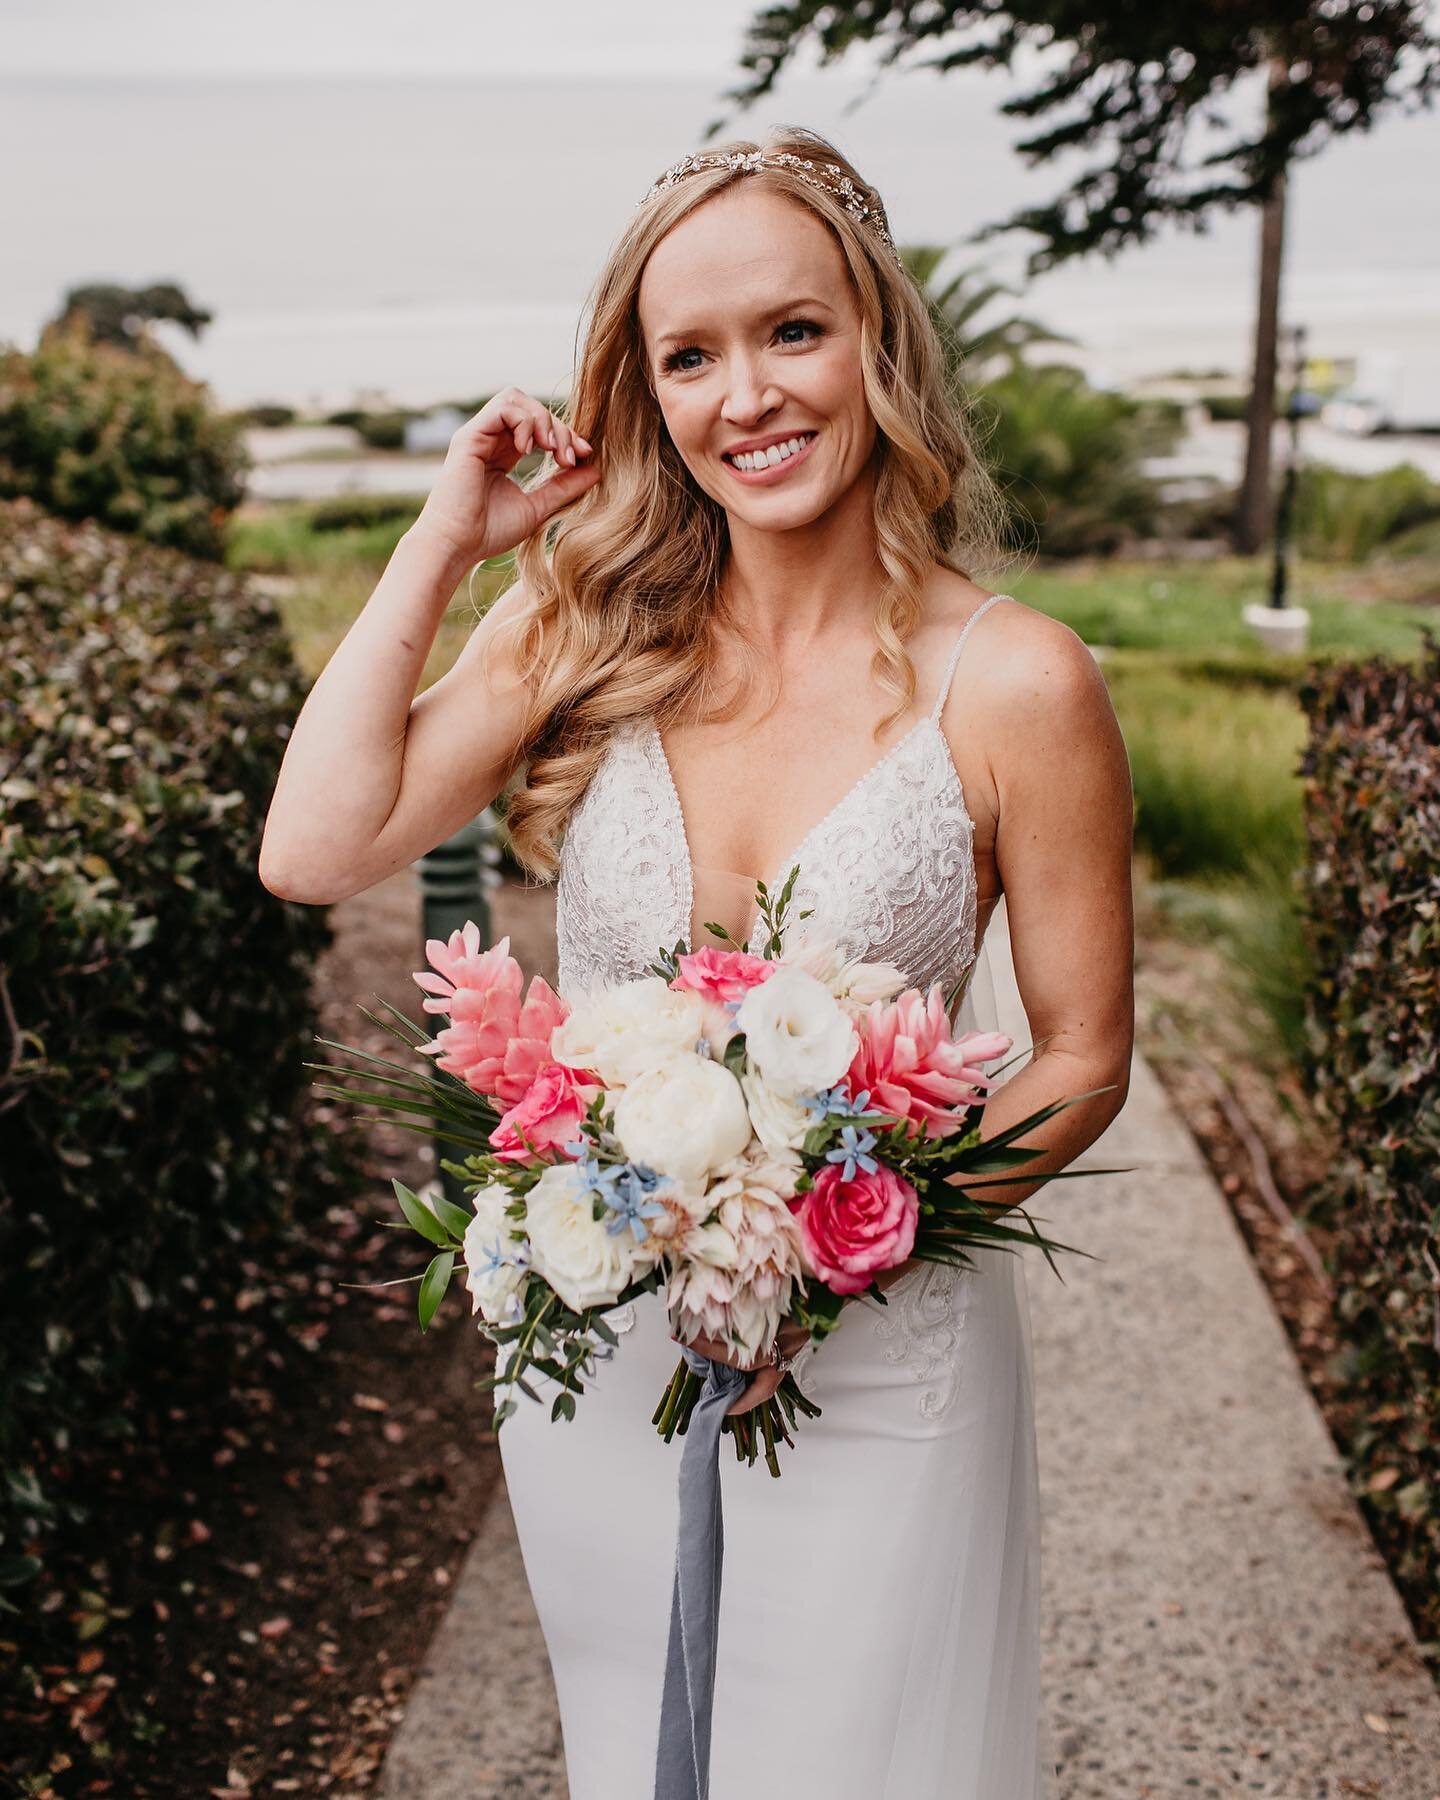 This gorgeous bride wanted a tropical garden look with pinks and accent blue! Loved the long hanging linen blue ribbon she chose. Her dress was dreamy. 🥰💗 
:::::::::::::
Venue: @laubergedelmar 
Photography: @mmcbphoto 
Planning &amp; coordination: 